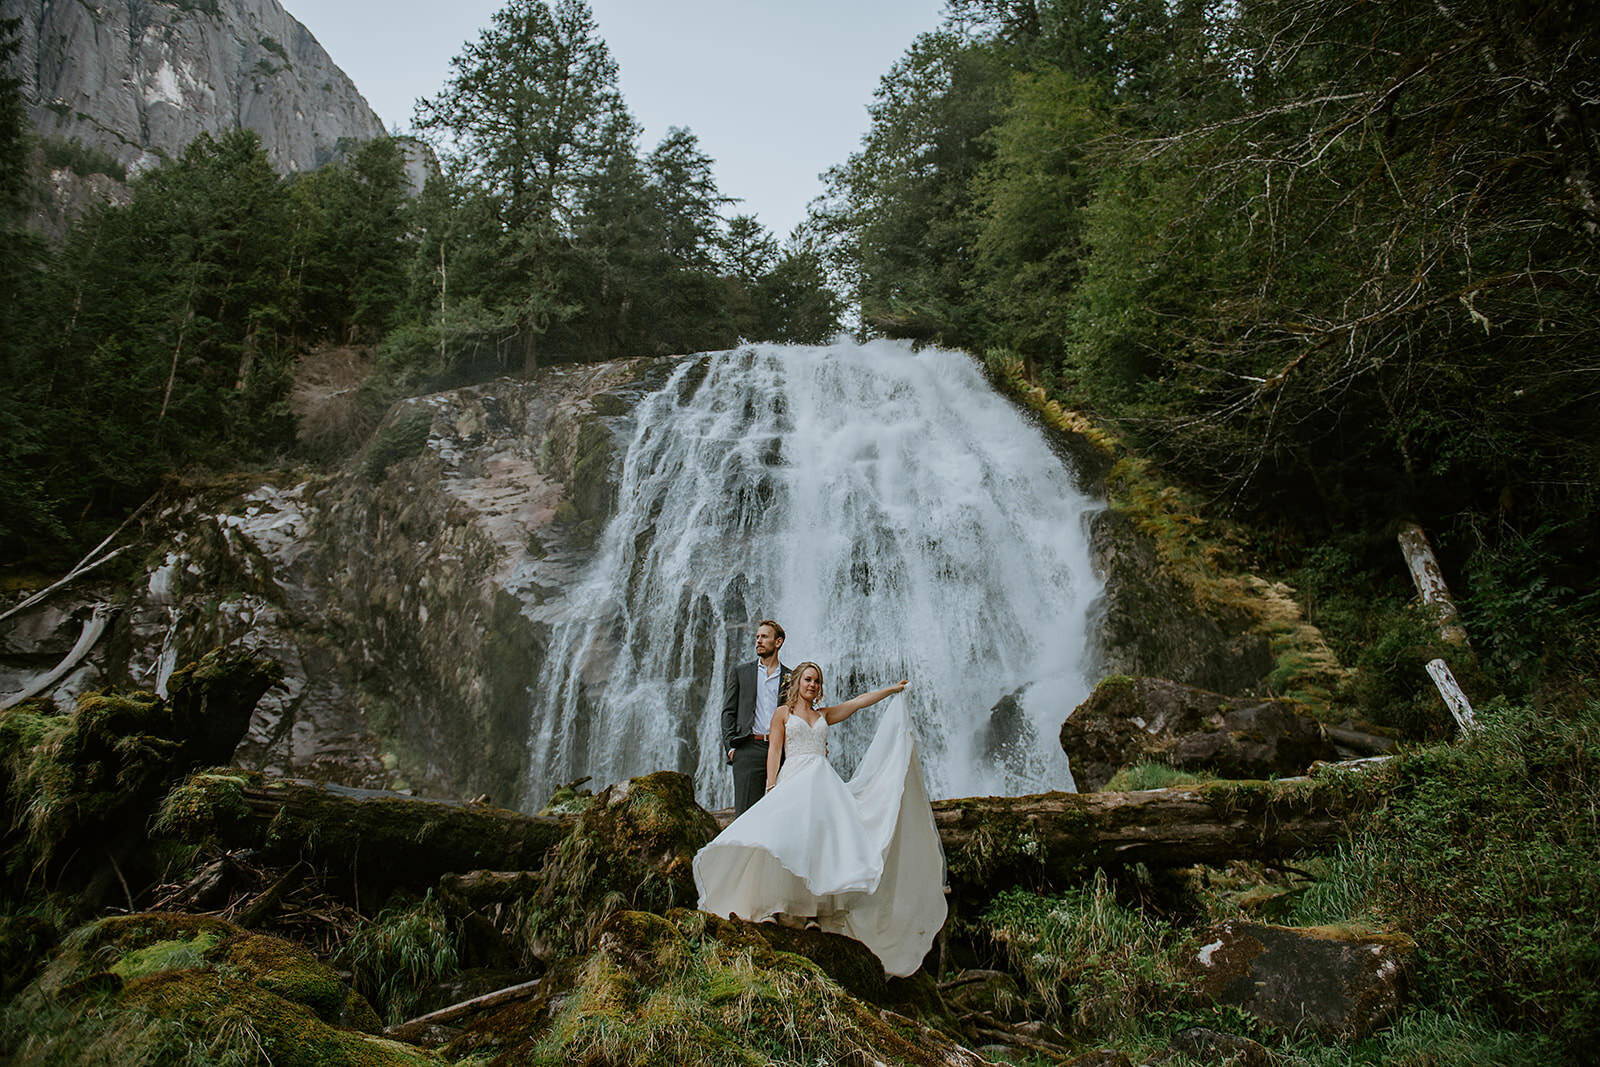 Couple standing under Chatterbox falls during their adventurous elopement.